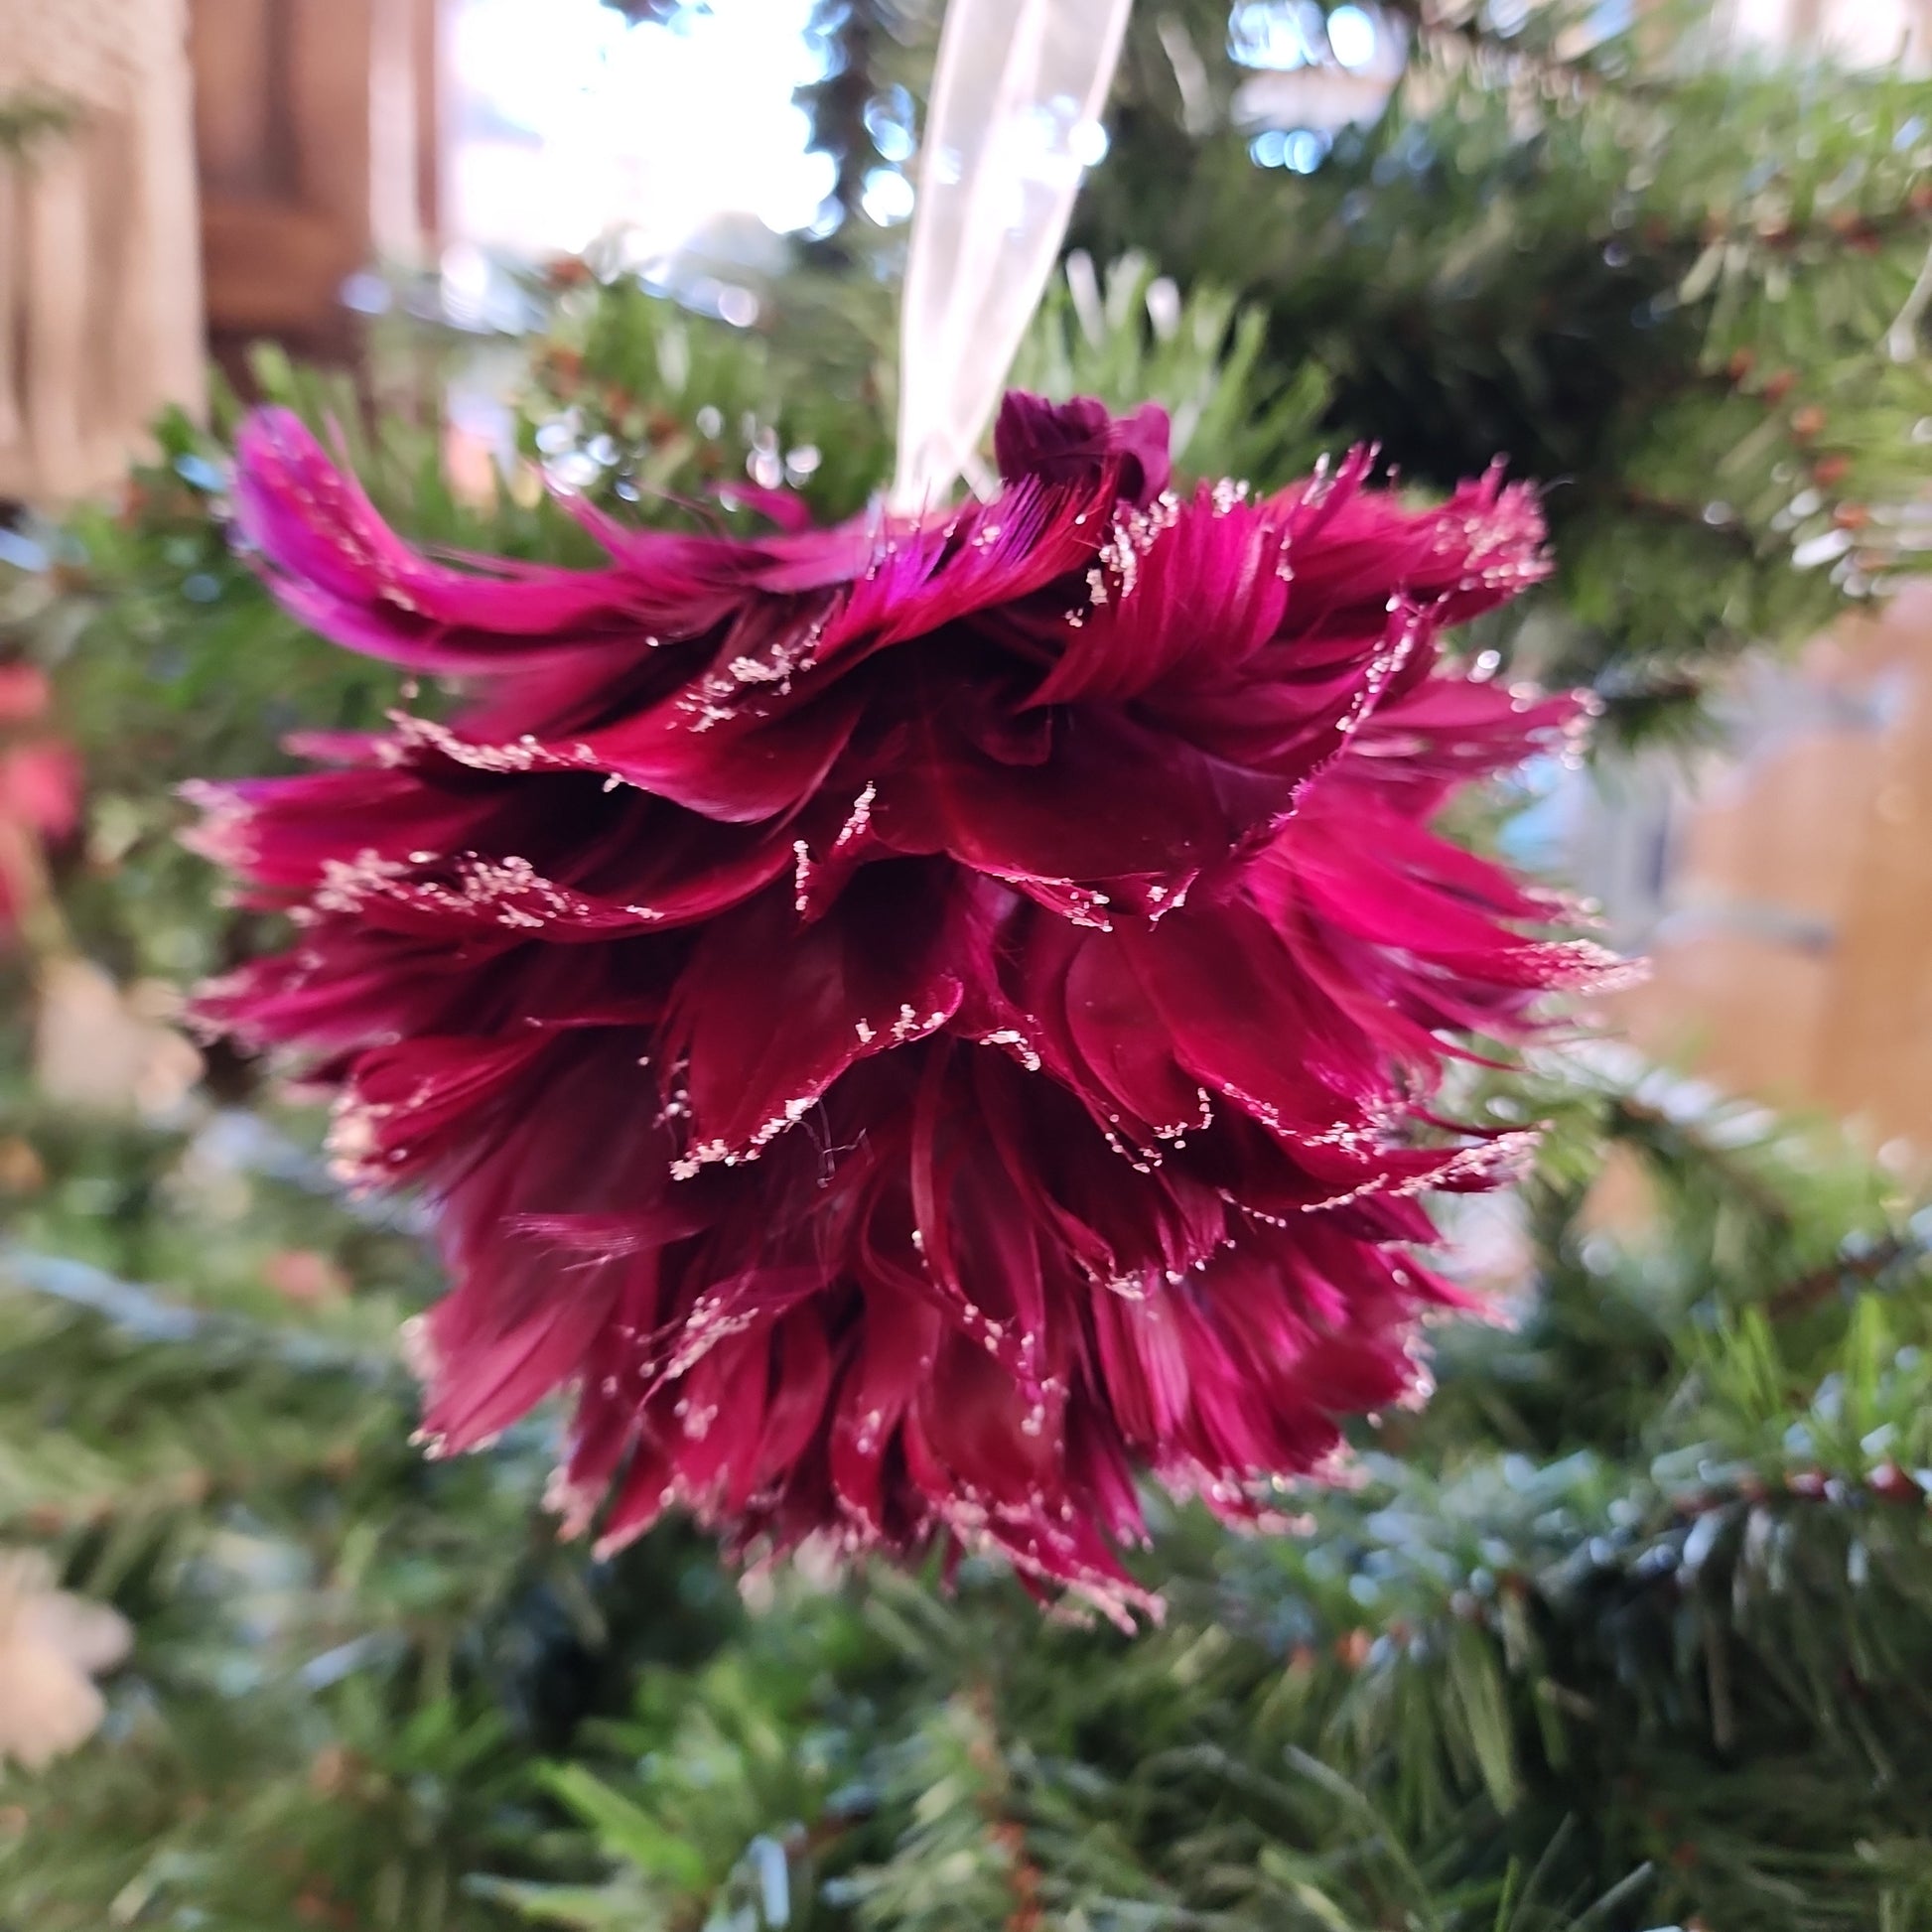 Feather Ball Ornament